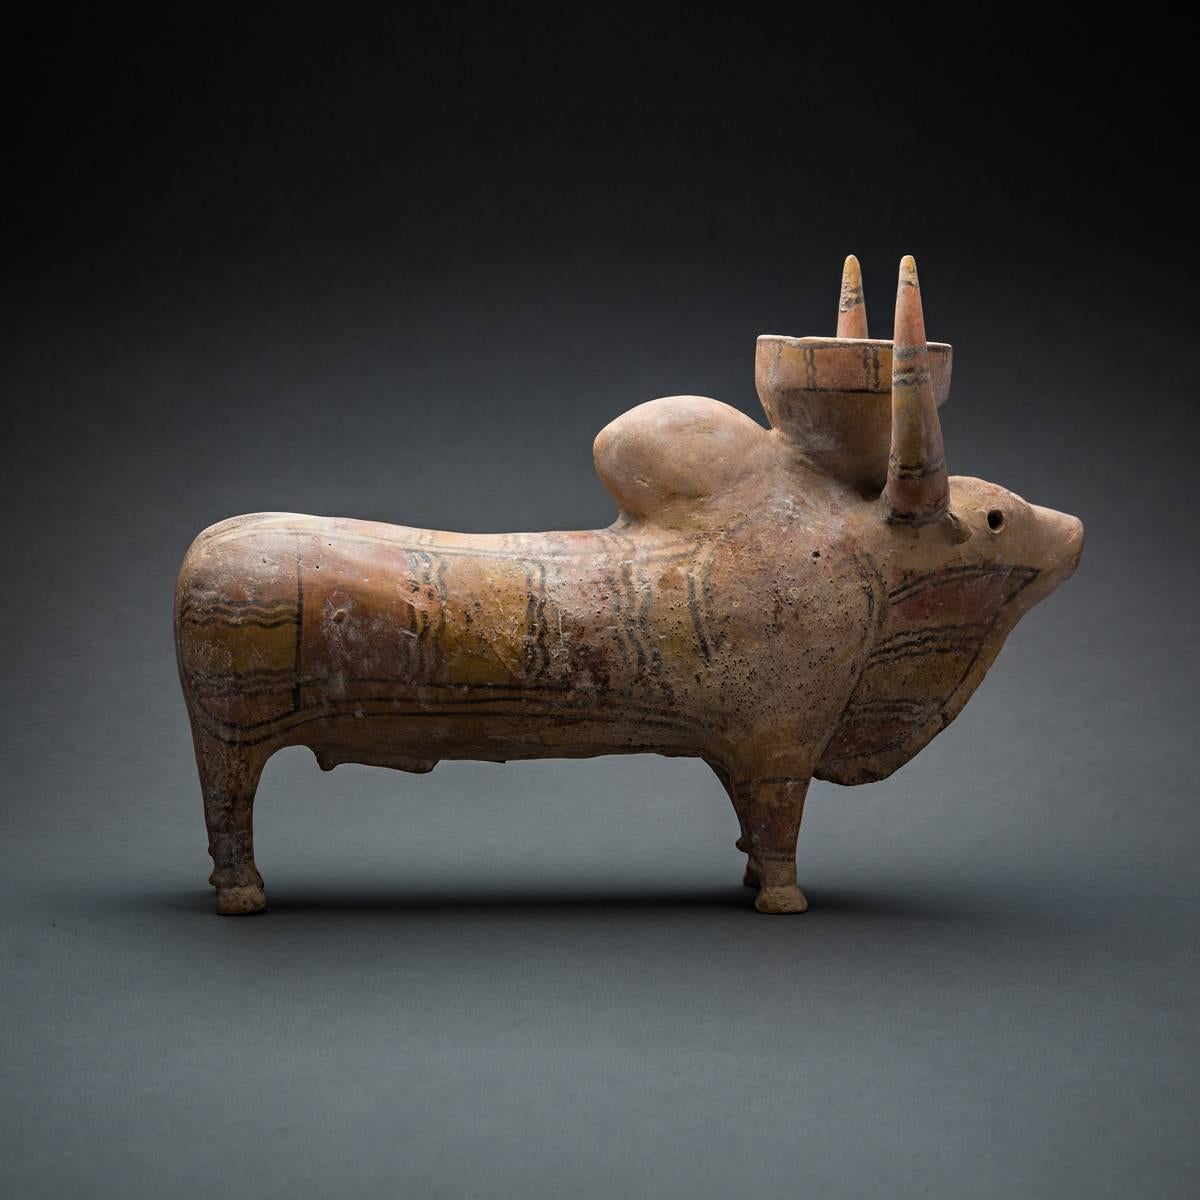 Large humped terracotta zebu bull standing on the four legs, his head supporting between two solid up-bent horns what looks like a ceremonial basket, the whole surface painted in bright colourful geometric patterns. The snout carefully sculpted with